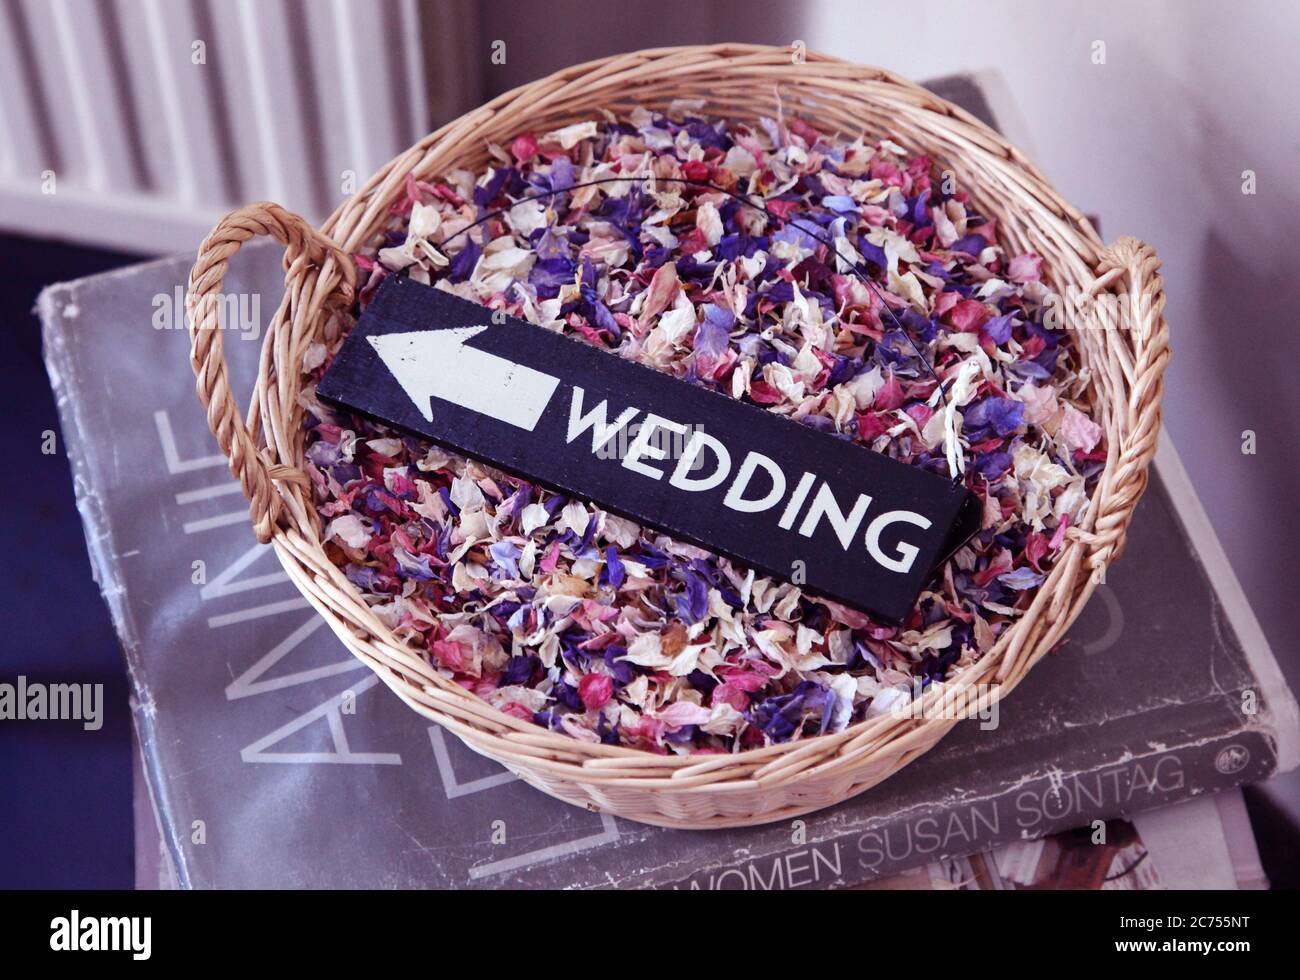 Wedding written text sign on wicker bowl of natural dried flower petal biodegradable confetti. Stock Photo